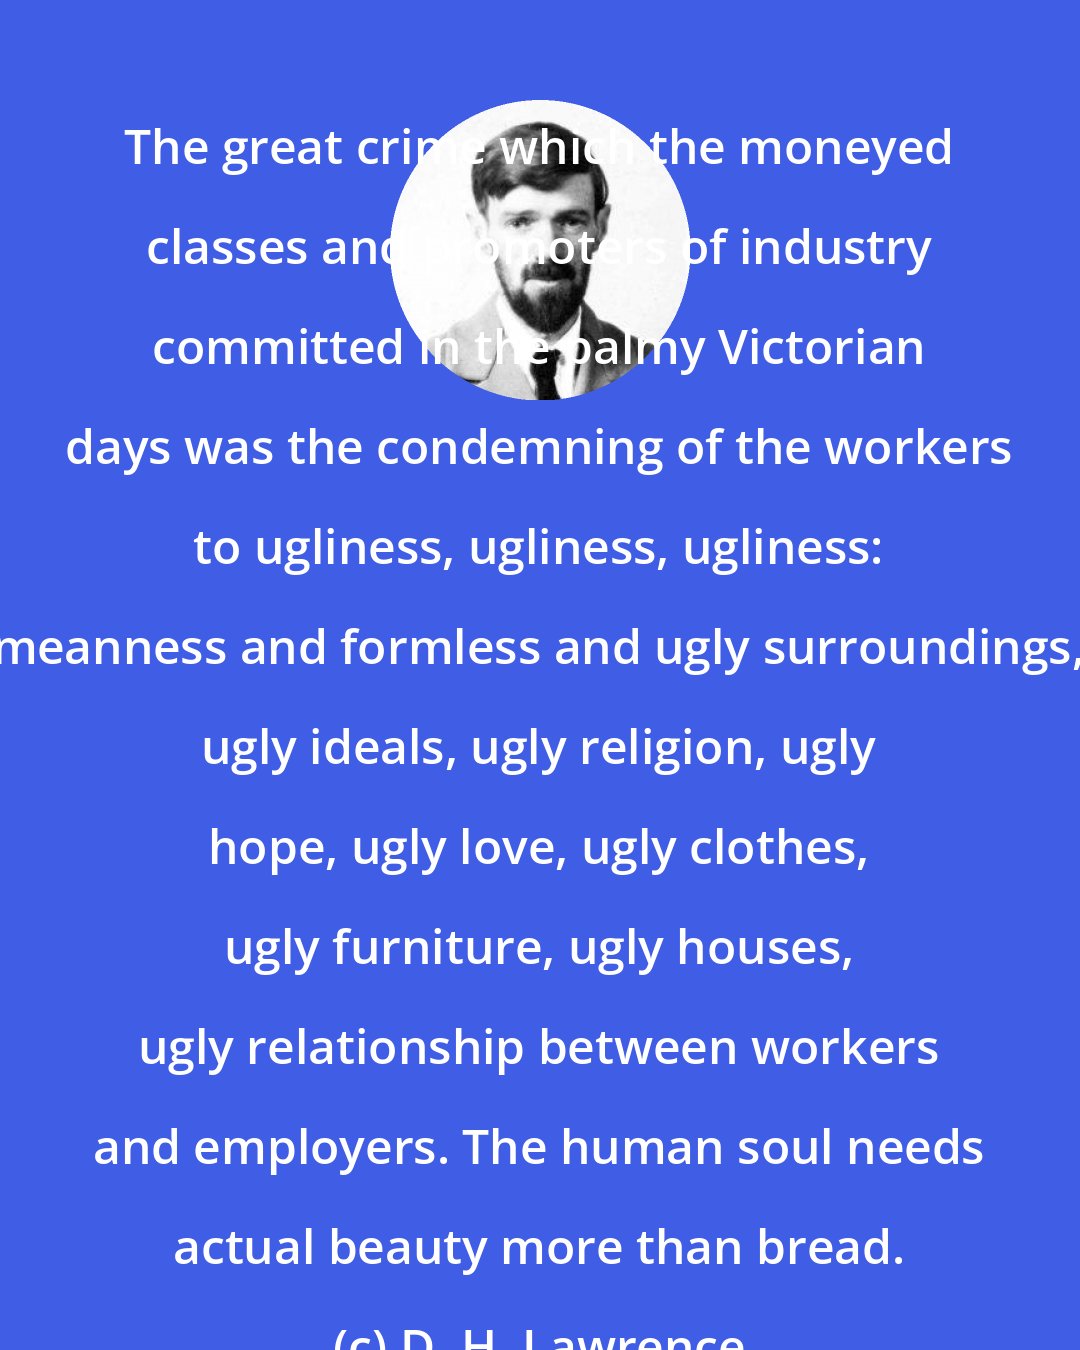 D. H. Lawrence: The great crime which the moneyed classes and promoters of industry committed in the palmy Victorian days was the condemning of the workers to ugliness, ugliness, ugliness: meanness and formless and ugly surroundings, ugly ideals, ugly religion, ugly hope, ugly love, ugly clothes, ugly furniture, ugly houses, ugly relationship between workers and employers. The human soul needs actual beauty more than bread.